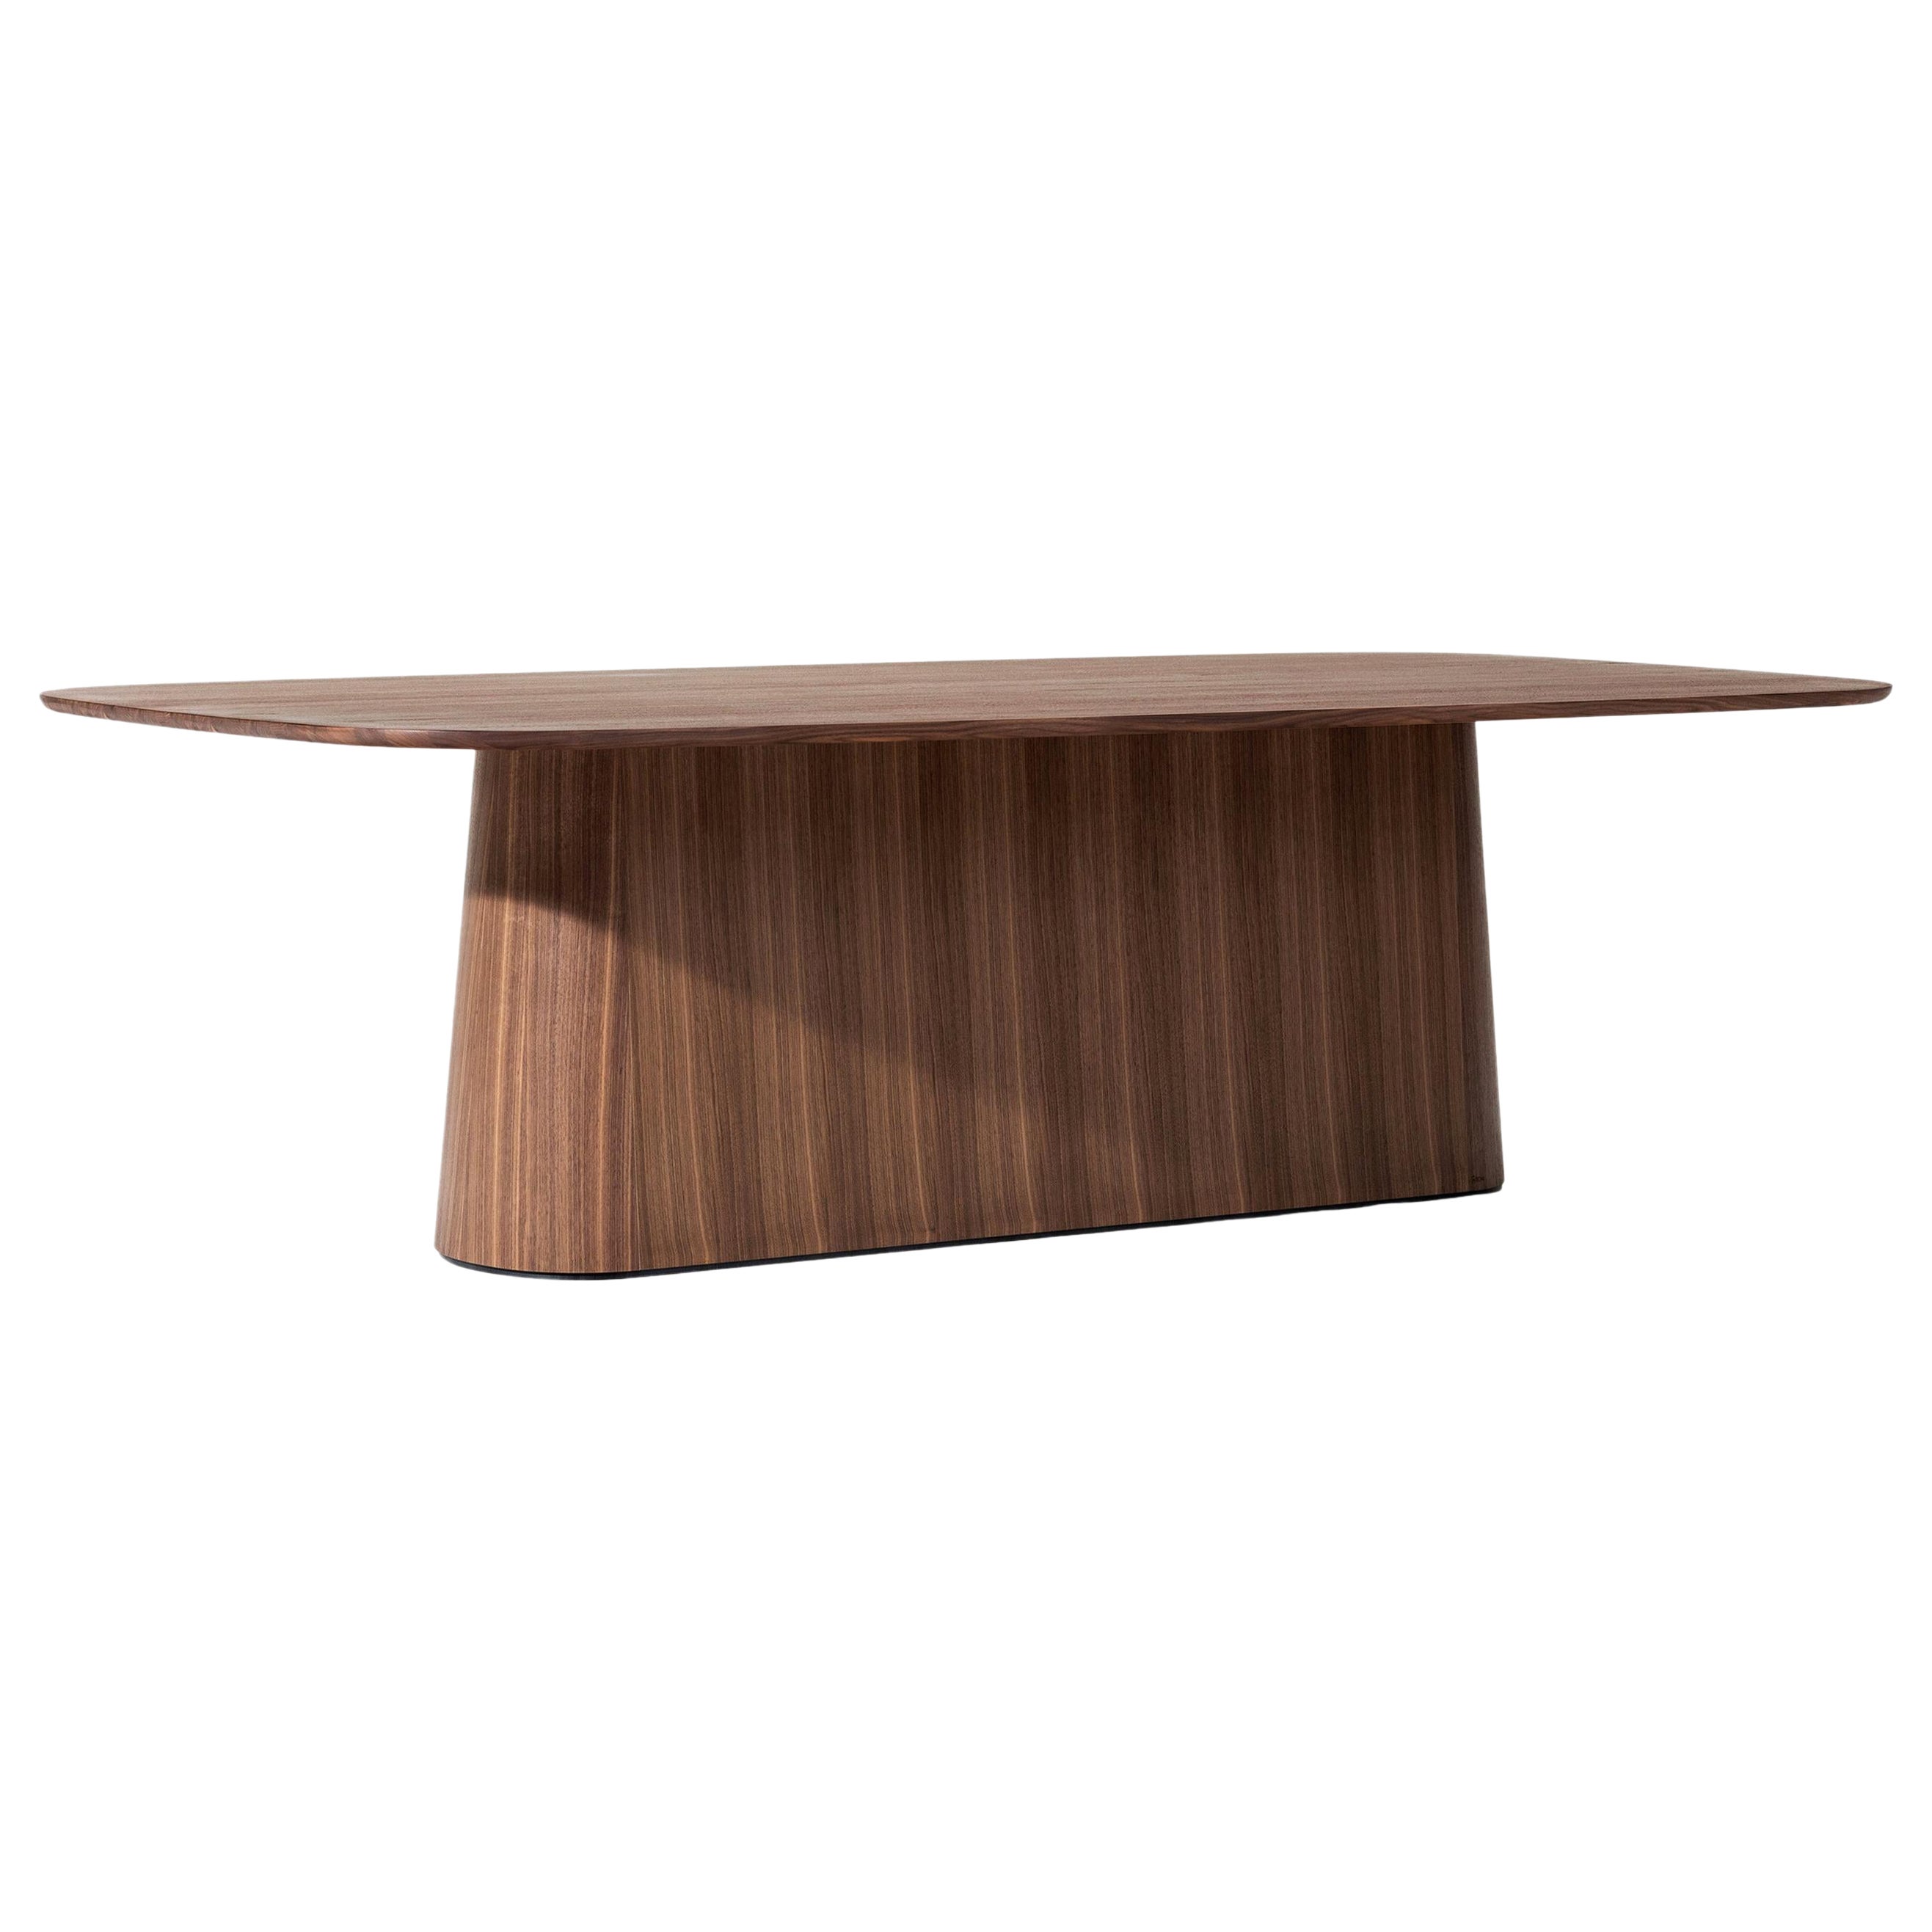 Contemporary Dining Table POV 465, Solid Oak or Walnut, 240